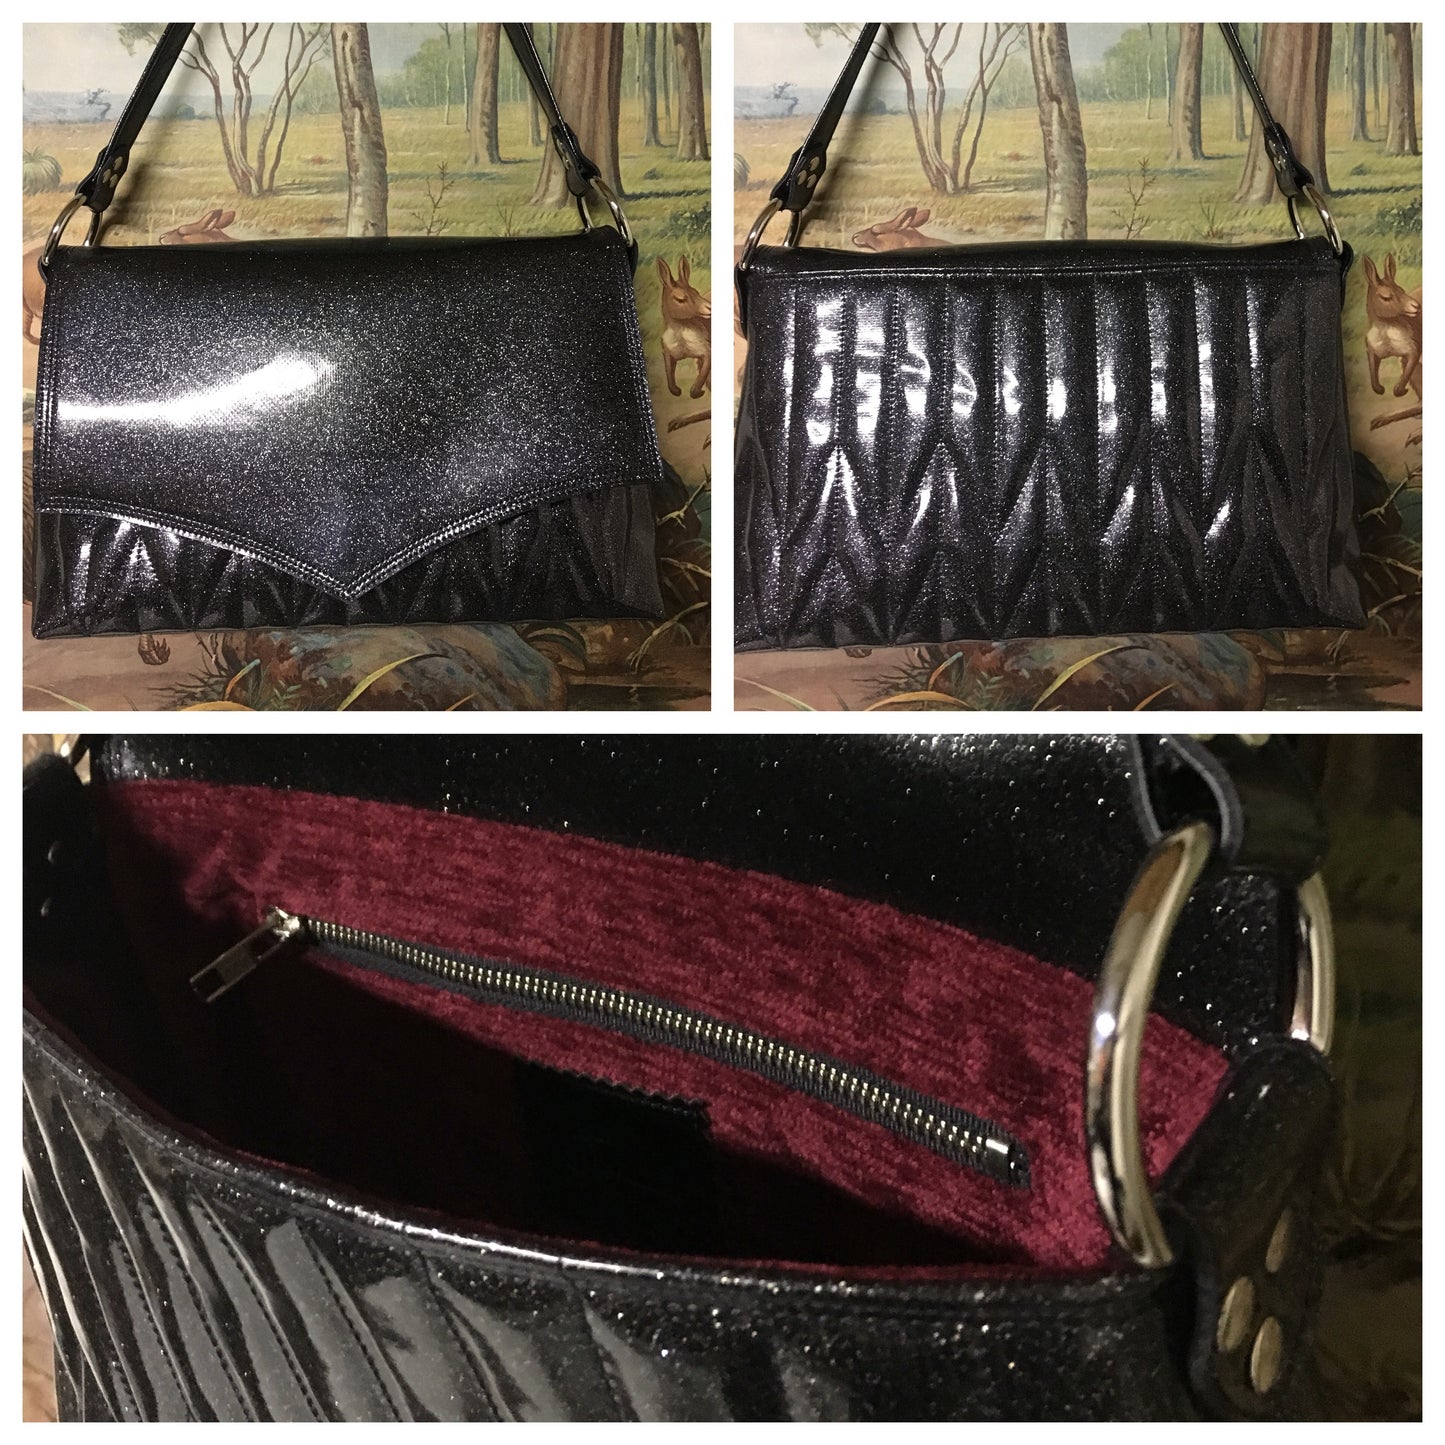 Saddle Bag with Firebird Pleating - Coal Black Glitter Vinyl with Spiced Wine Lining